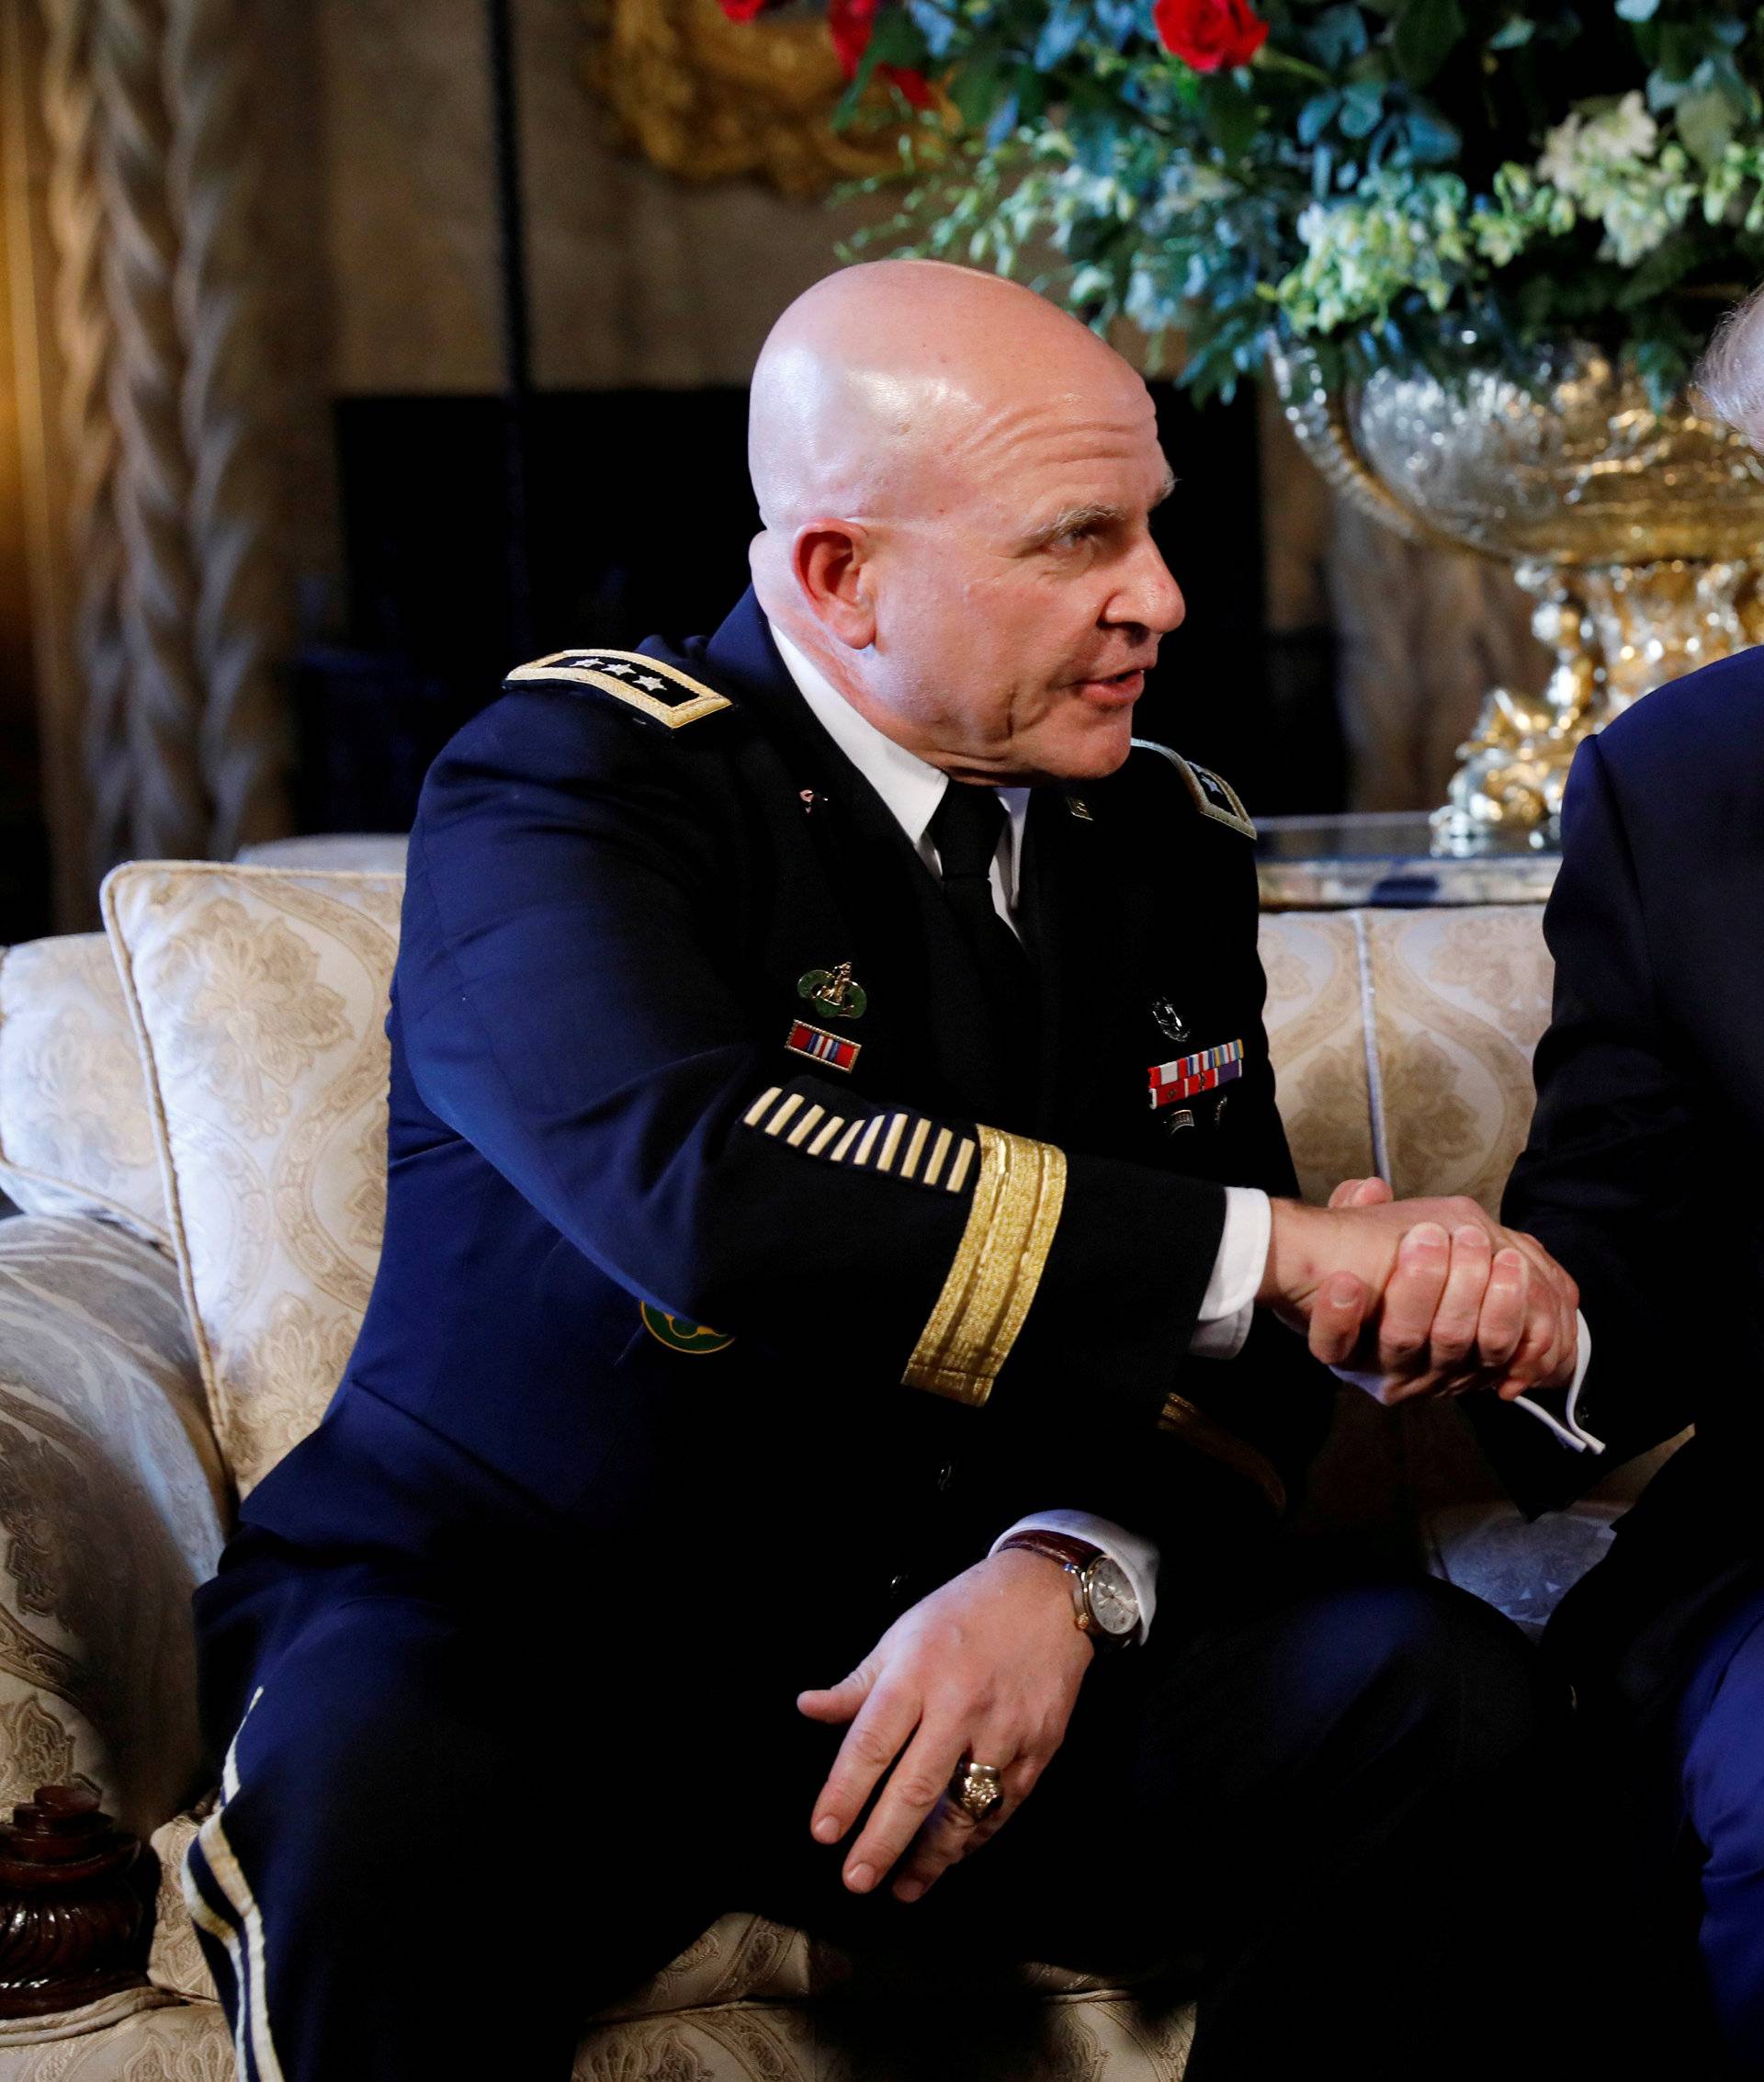 FILE PHOTO - U.S. President Donald Trump shakes hands with his new National Security Adviser Army Lt. Gen. H.R. McMaster after making the announcement at his Mar-a-Lago estate in Palm Beach